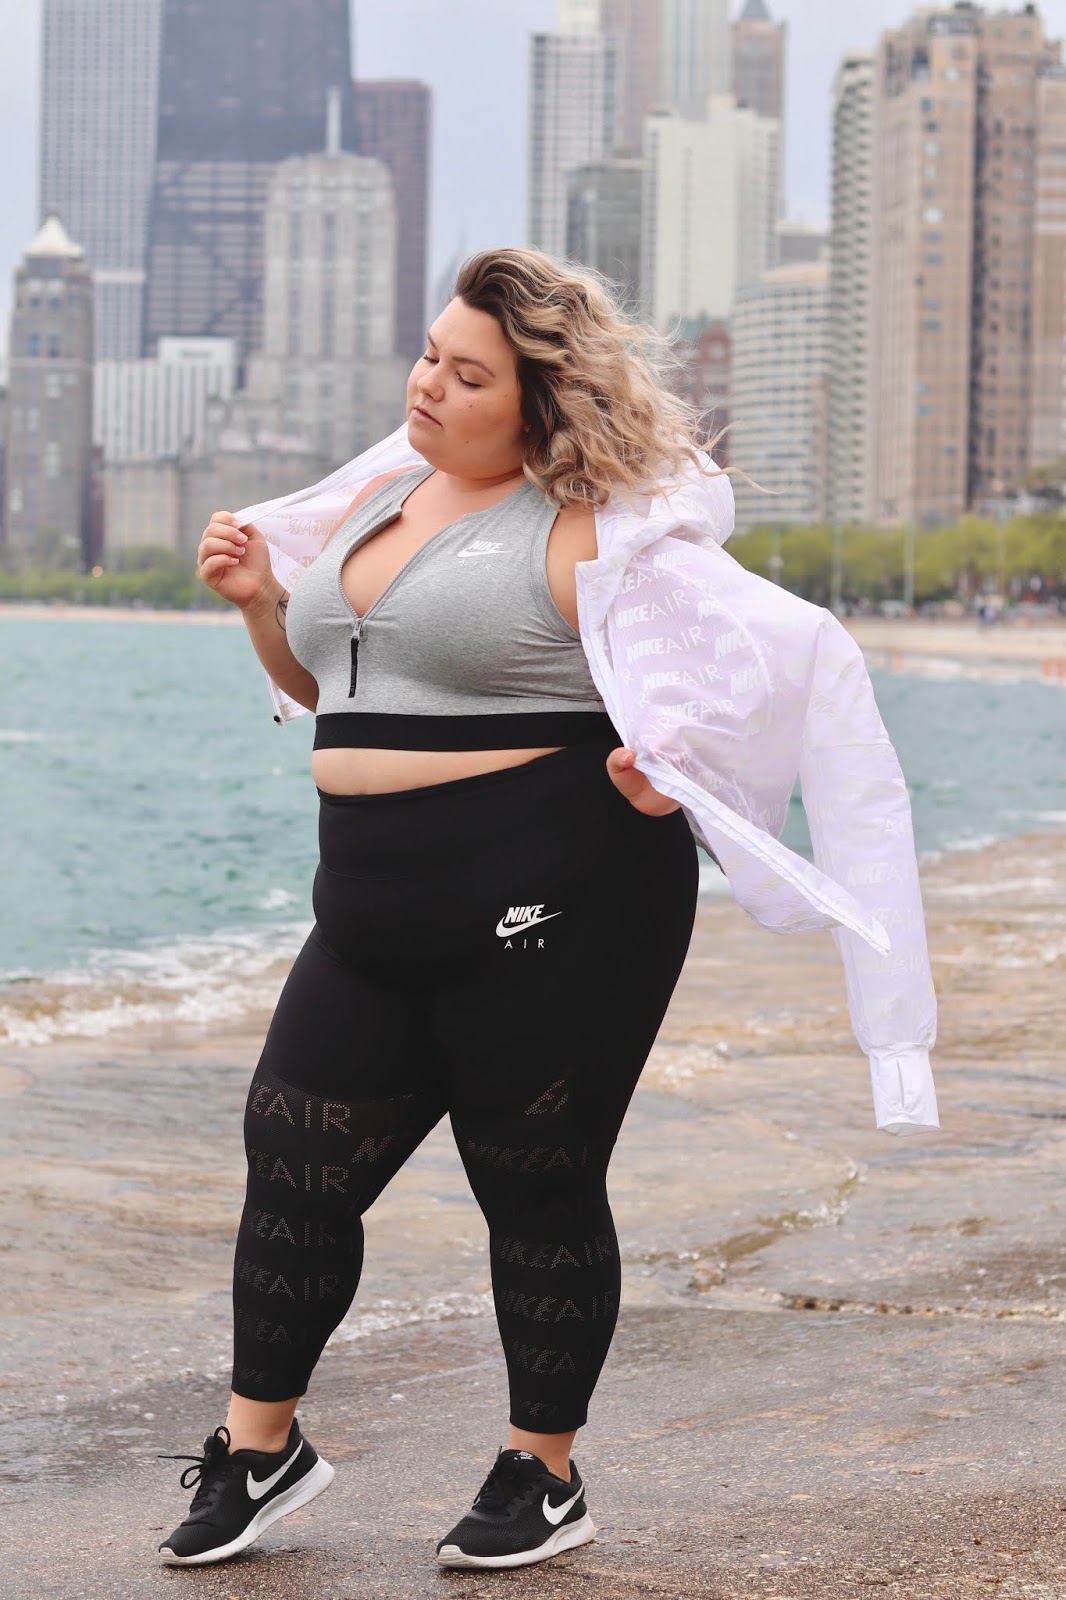 Plus size outfit of the day as told by @Natalie ✨ Natalie is wearing